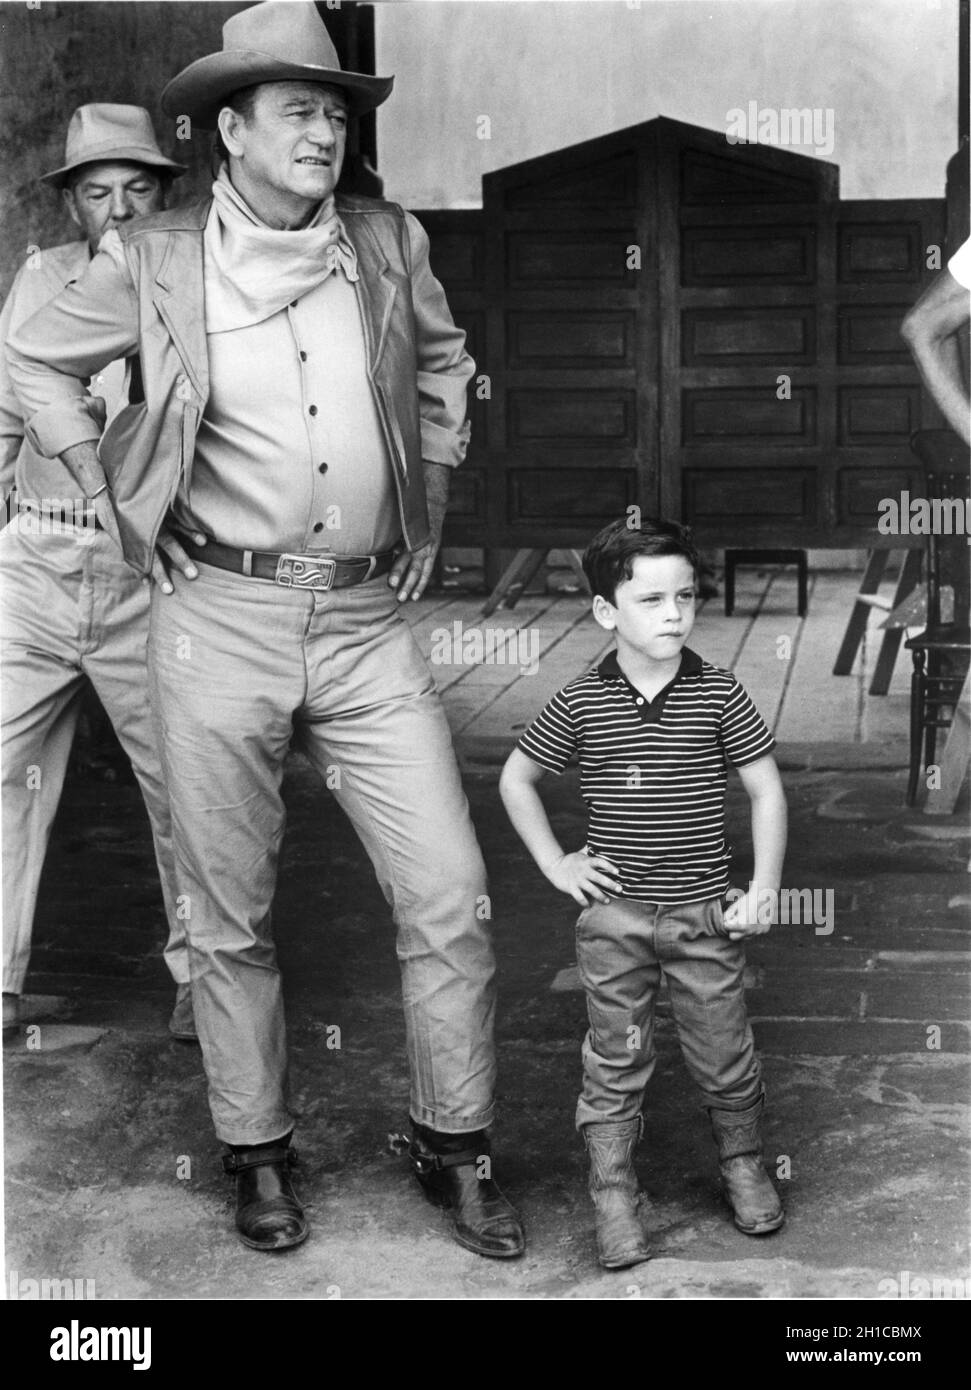 JOHN WAYNE and his 4 year old son JOHN ETHAN on set candid during filming of THE WAR WAGON 1967 director BURT KENNEDY novel / screenplay Clair Huffaker music Dimitri Tiomkin costume design Oscar Rodriguez Batjac Productions / Marvin Schwartz Productions / Universal Pictures Stock Photo